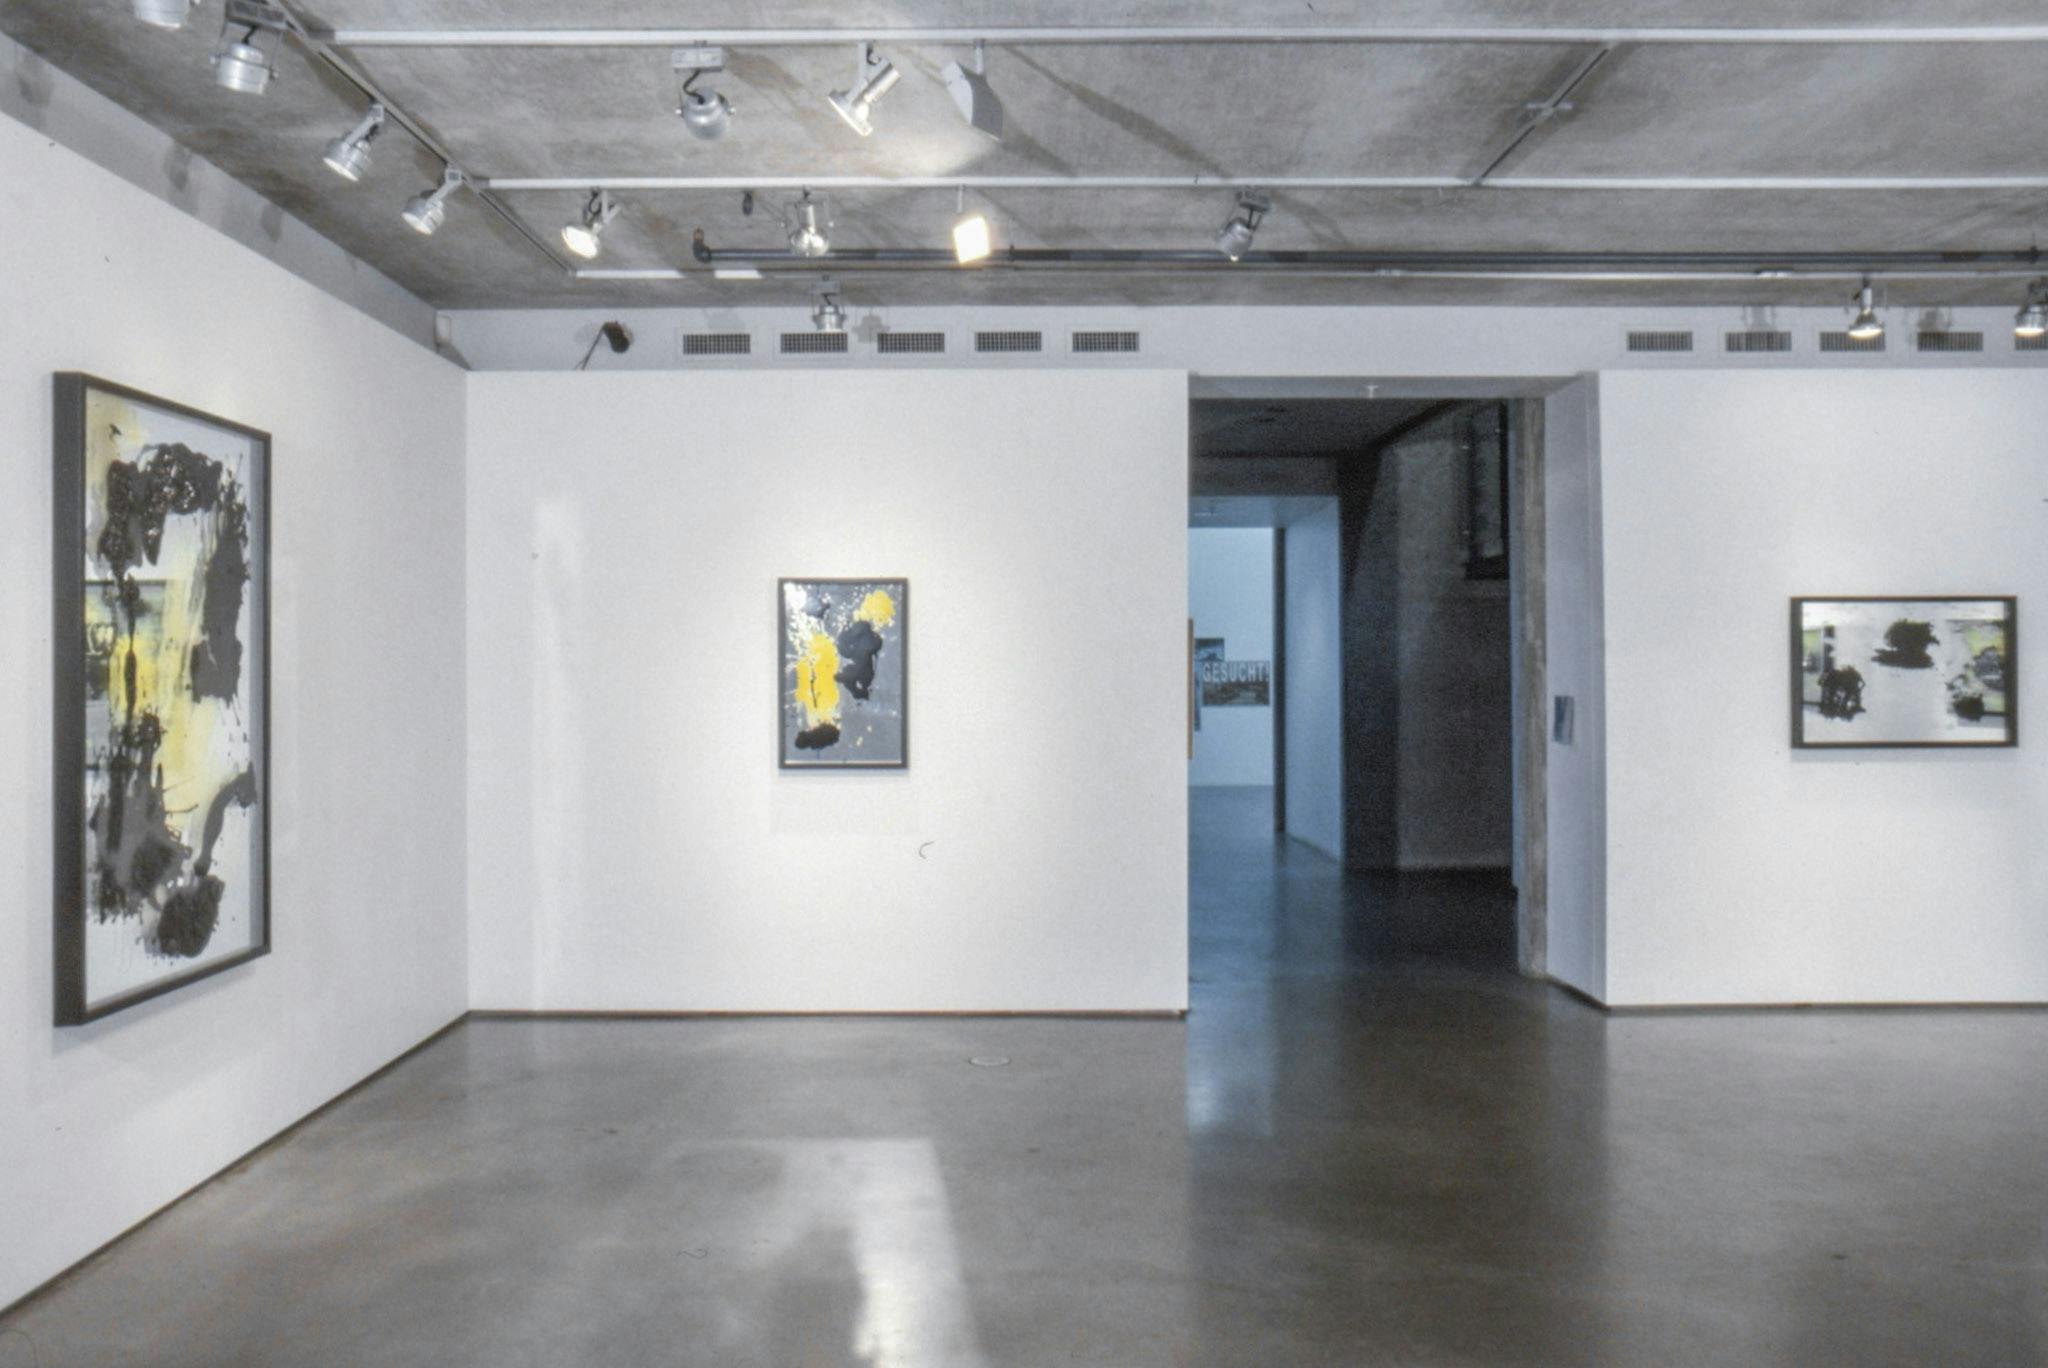 Installation image of Marina Roy’s paintings. Paintings of abstract shapes in black and yellow are made on the mirrors. Three paintings, varying in size, are mounted on the walls.